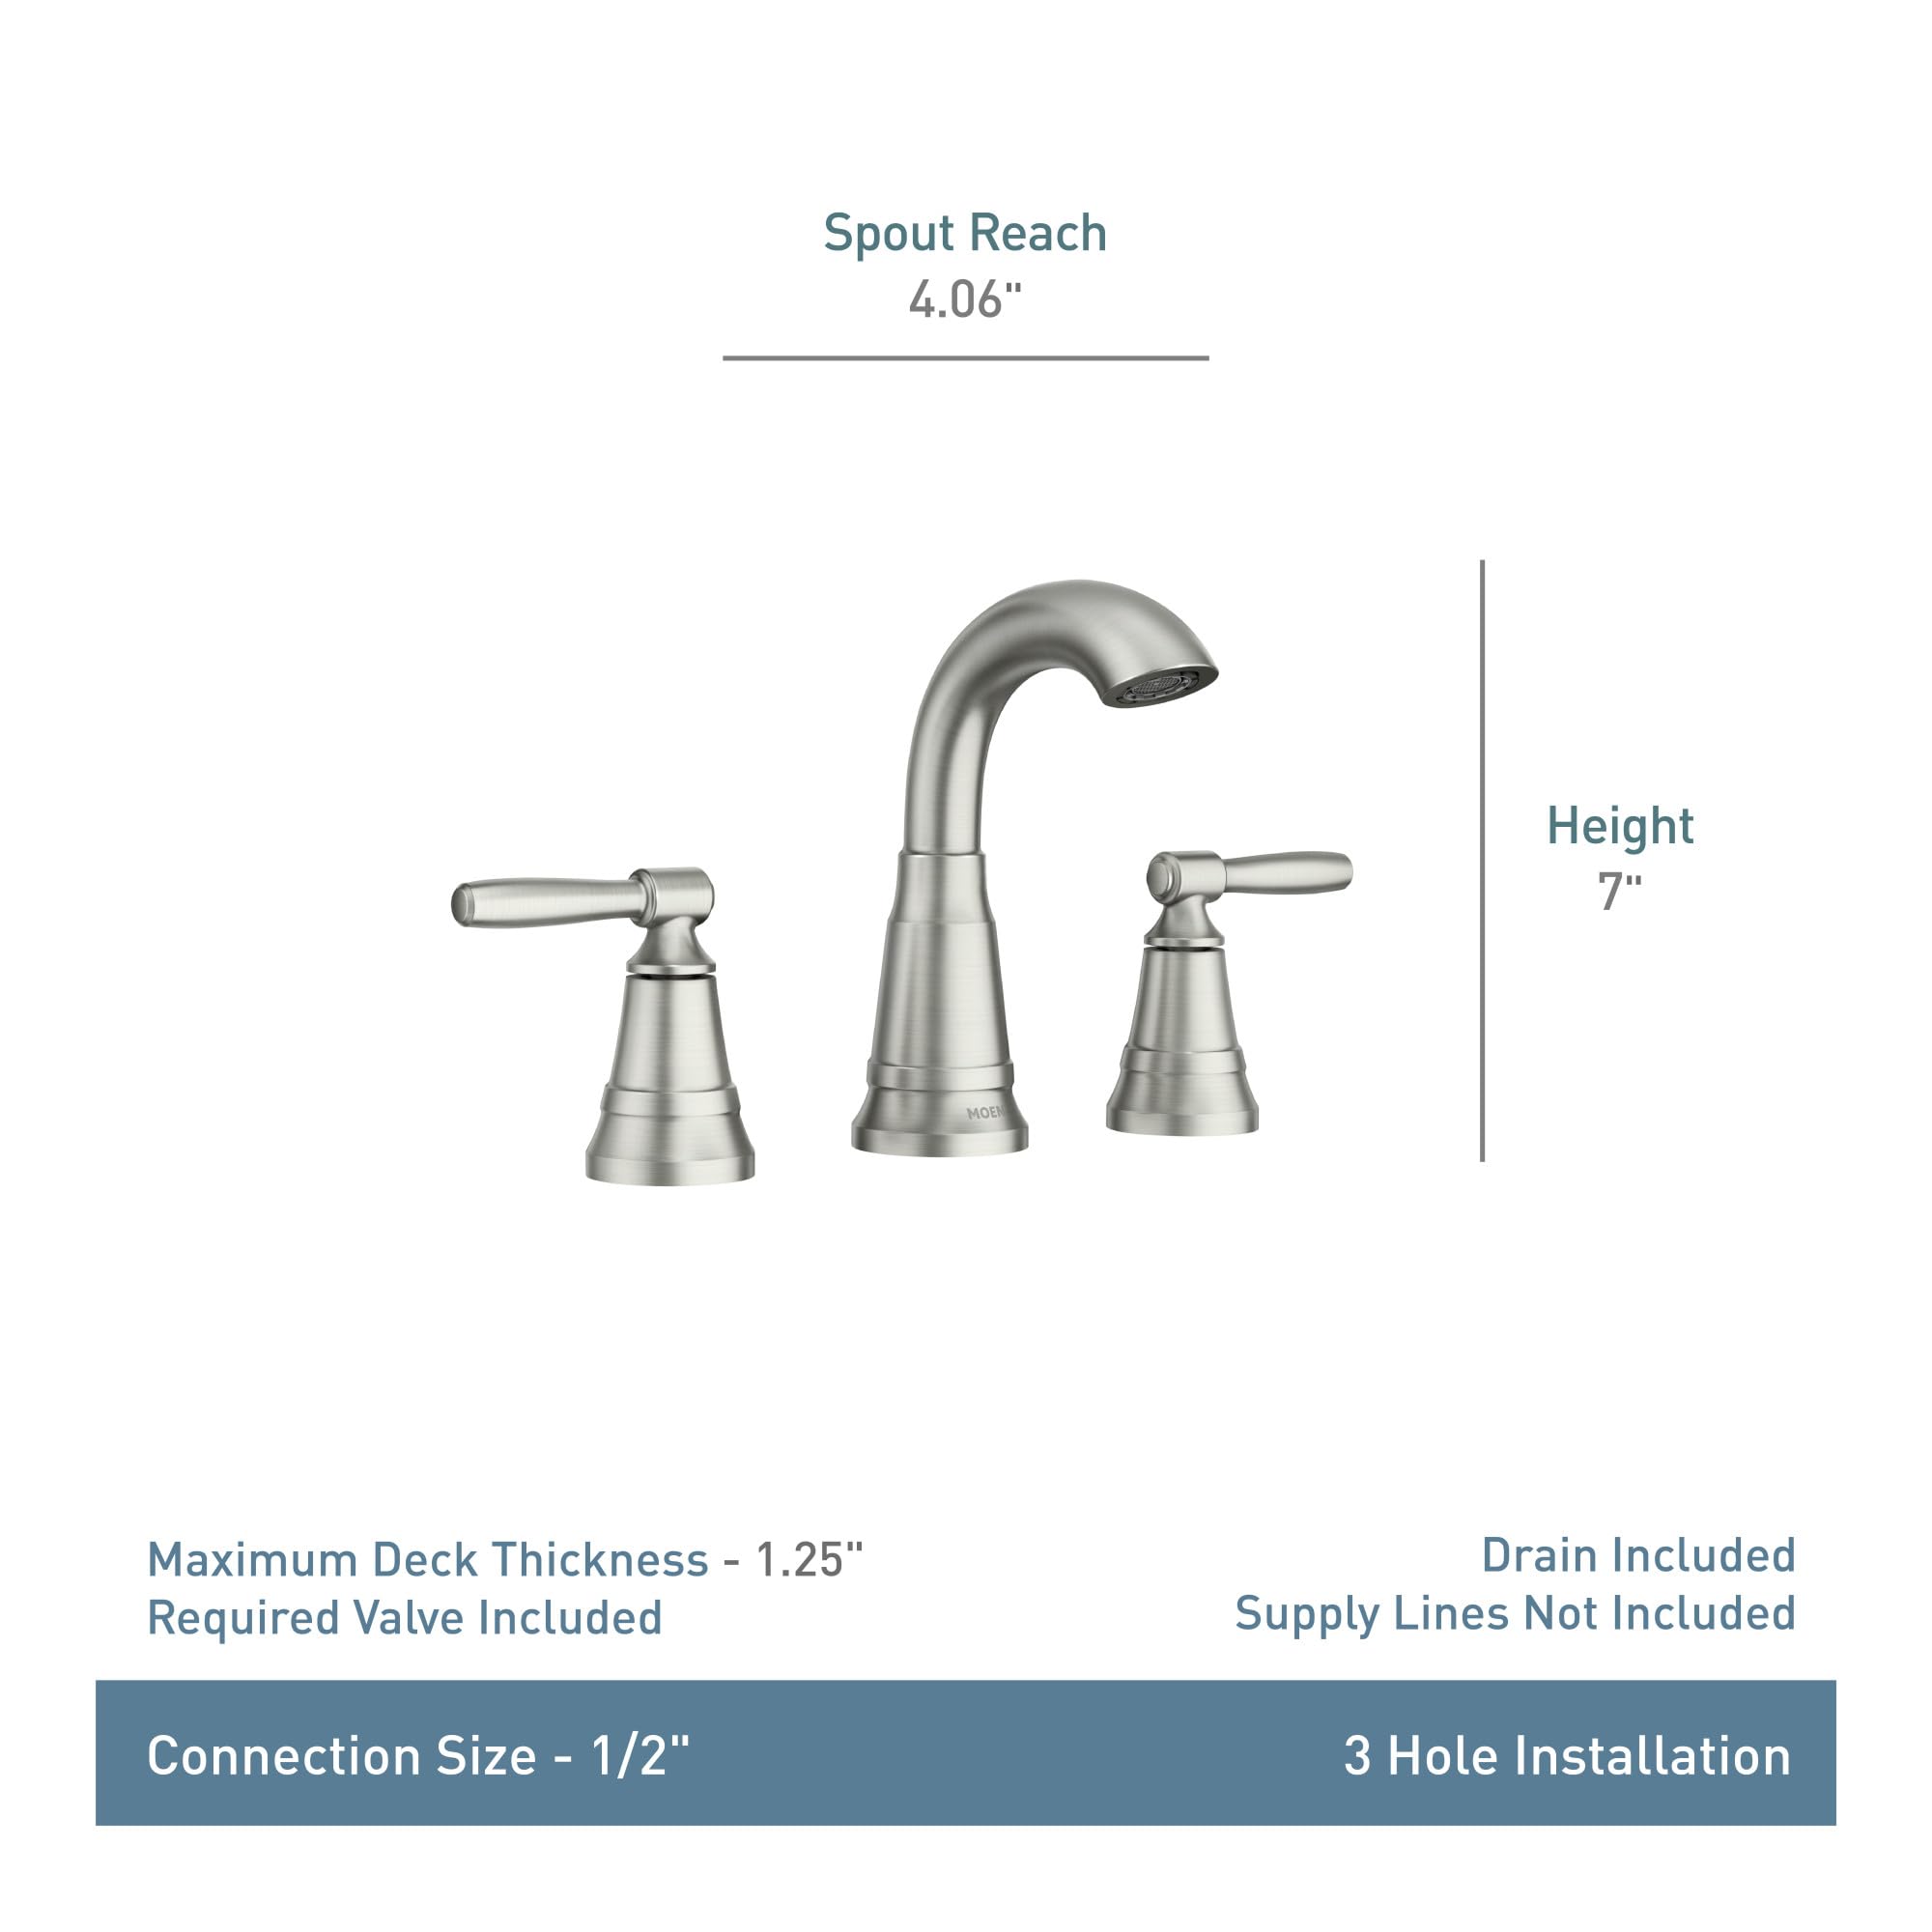 Moen Halle Spot Resist Nickel Widespread Bathroom Faucet with Drain Assembly, Traditional Bathroom Sink Faucet for 3-Hole Applications, 84972SRN